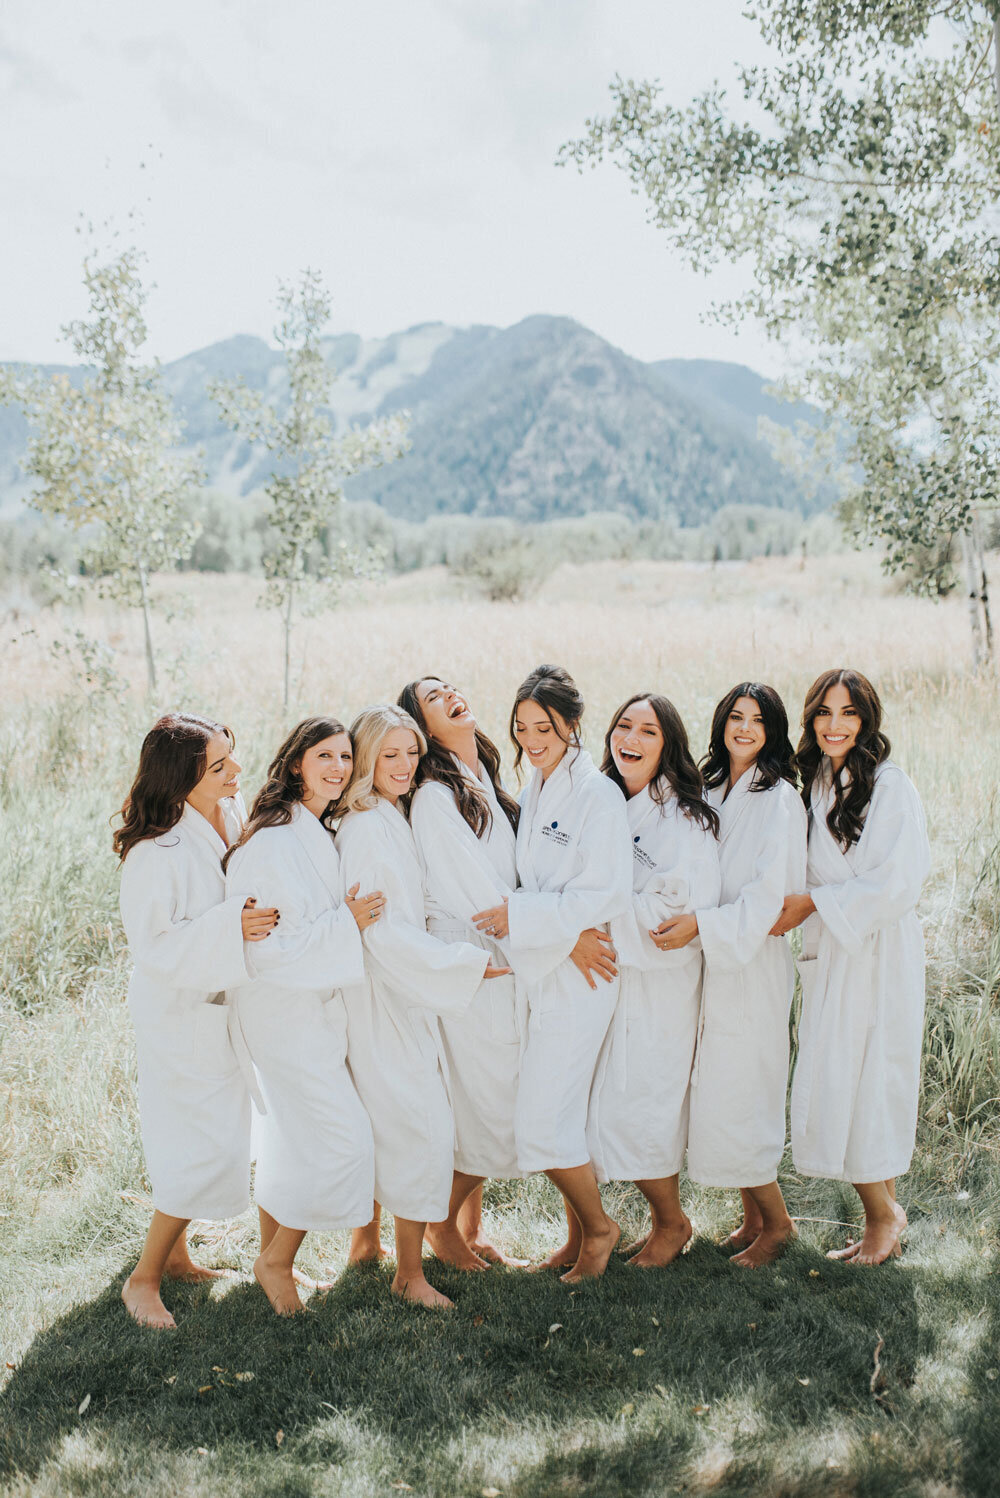 Bride and bridal party in white robes before the outdoor mountain wedding